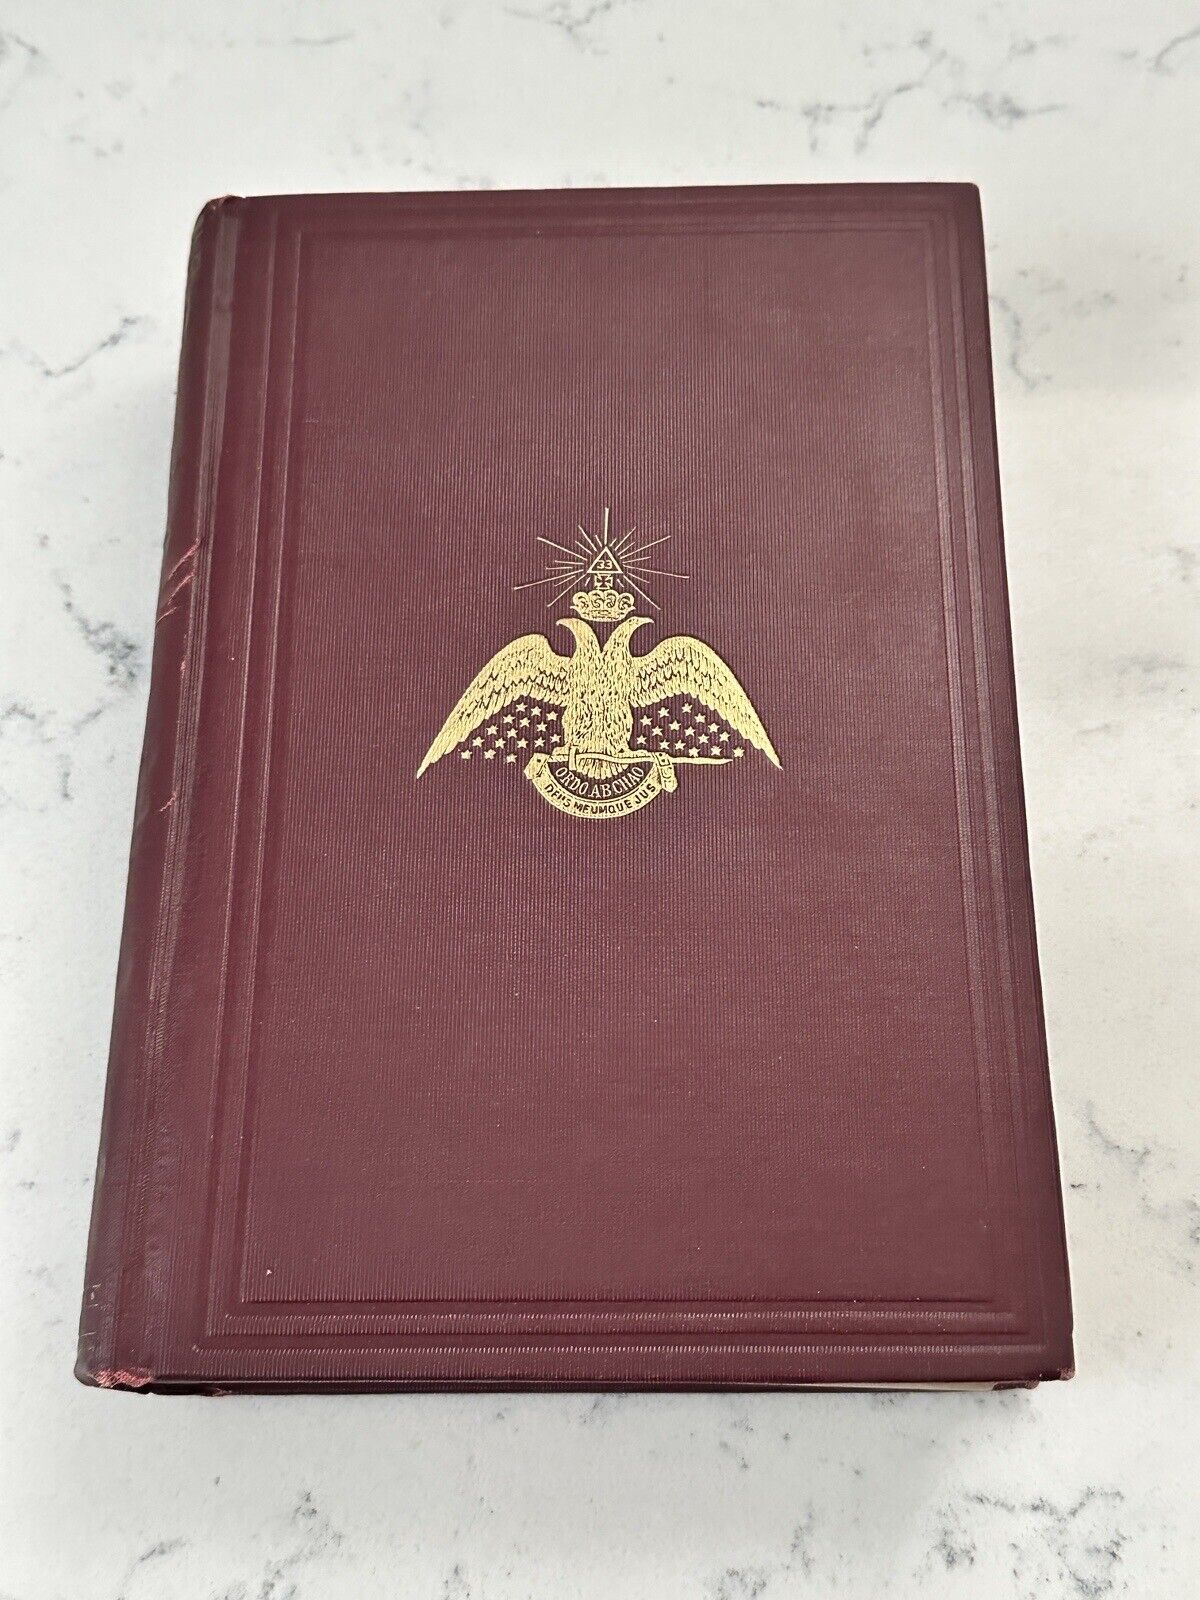 Antique Morals and Dogma Book Accepted Scottish Rite Freemasonry - 1906 2nd Edit